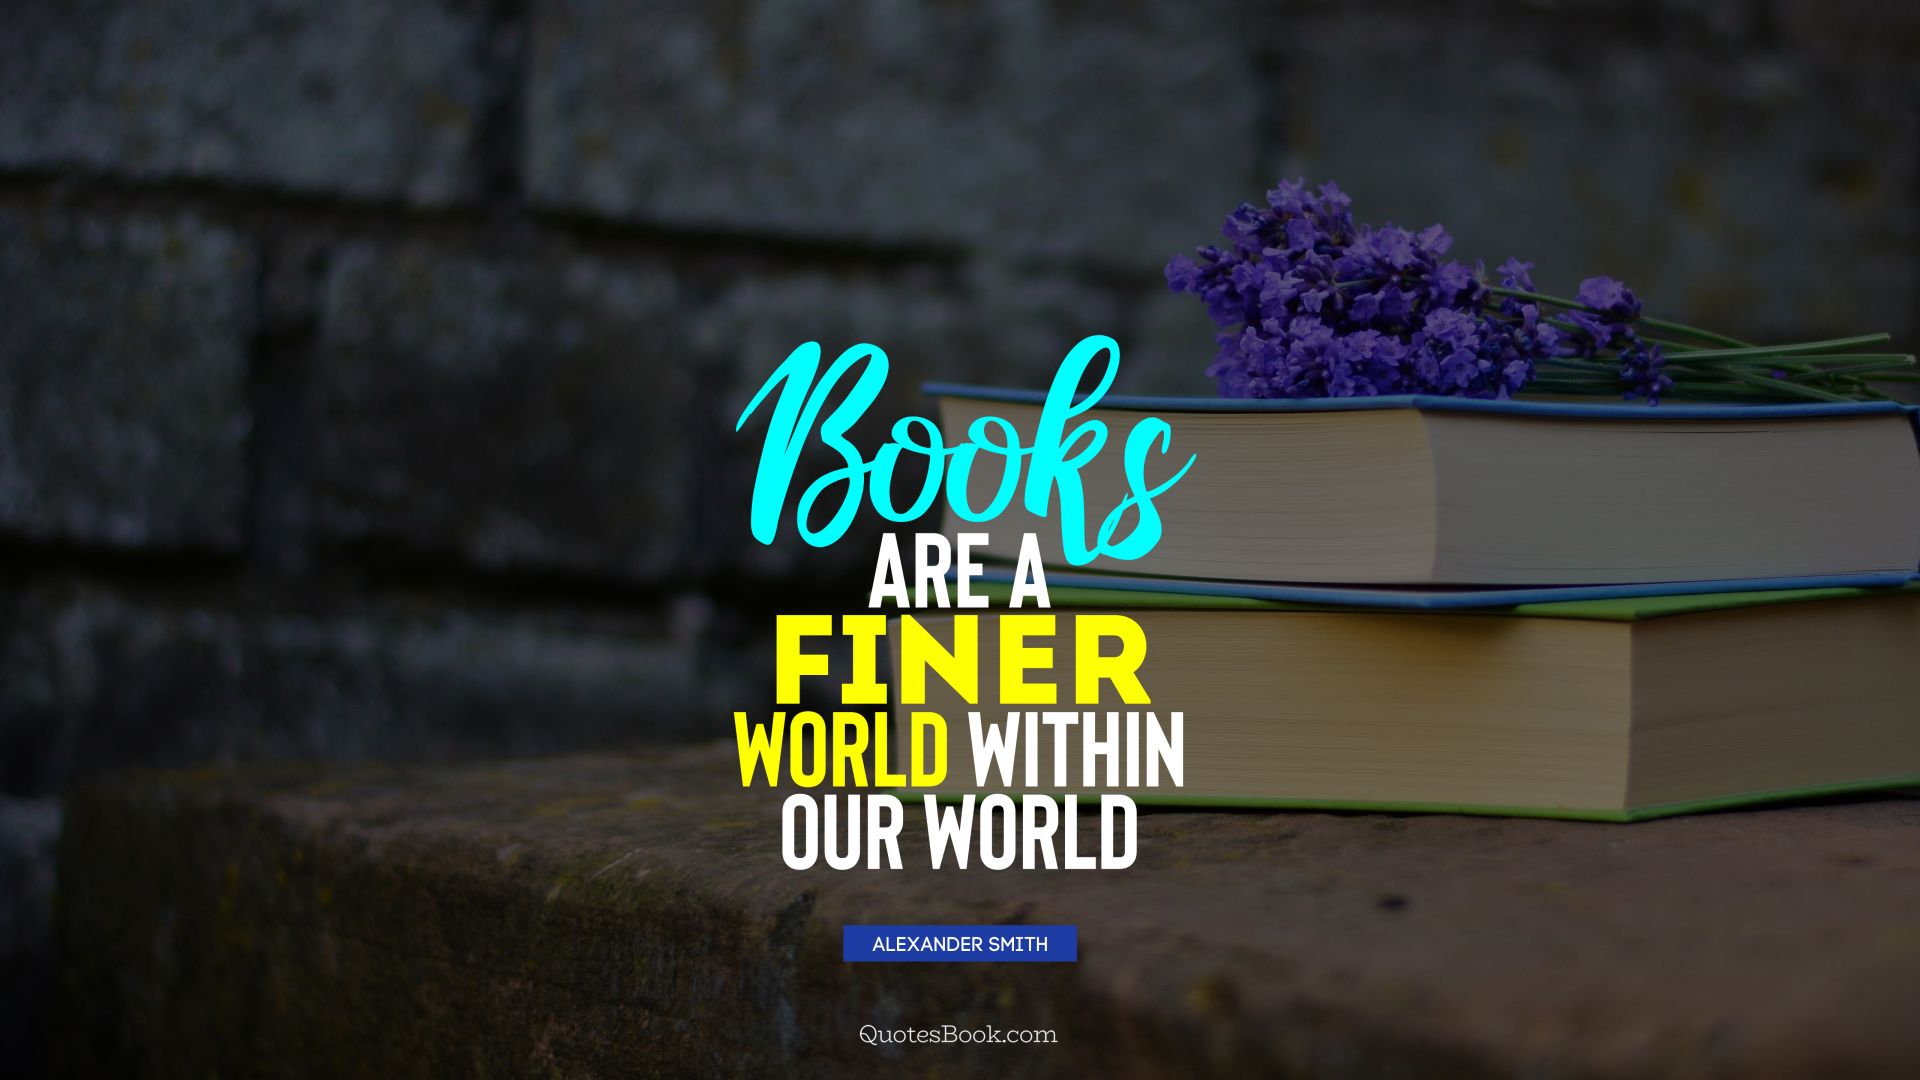 Books are a finer world within our world. - Quote by Alexander Smith